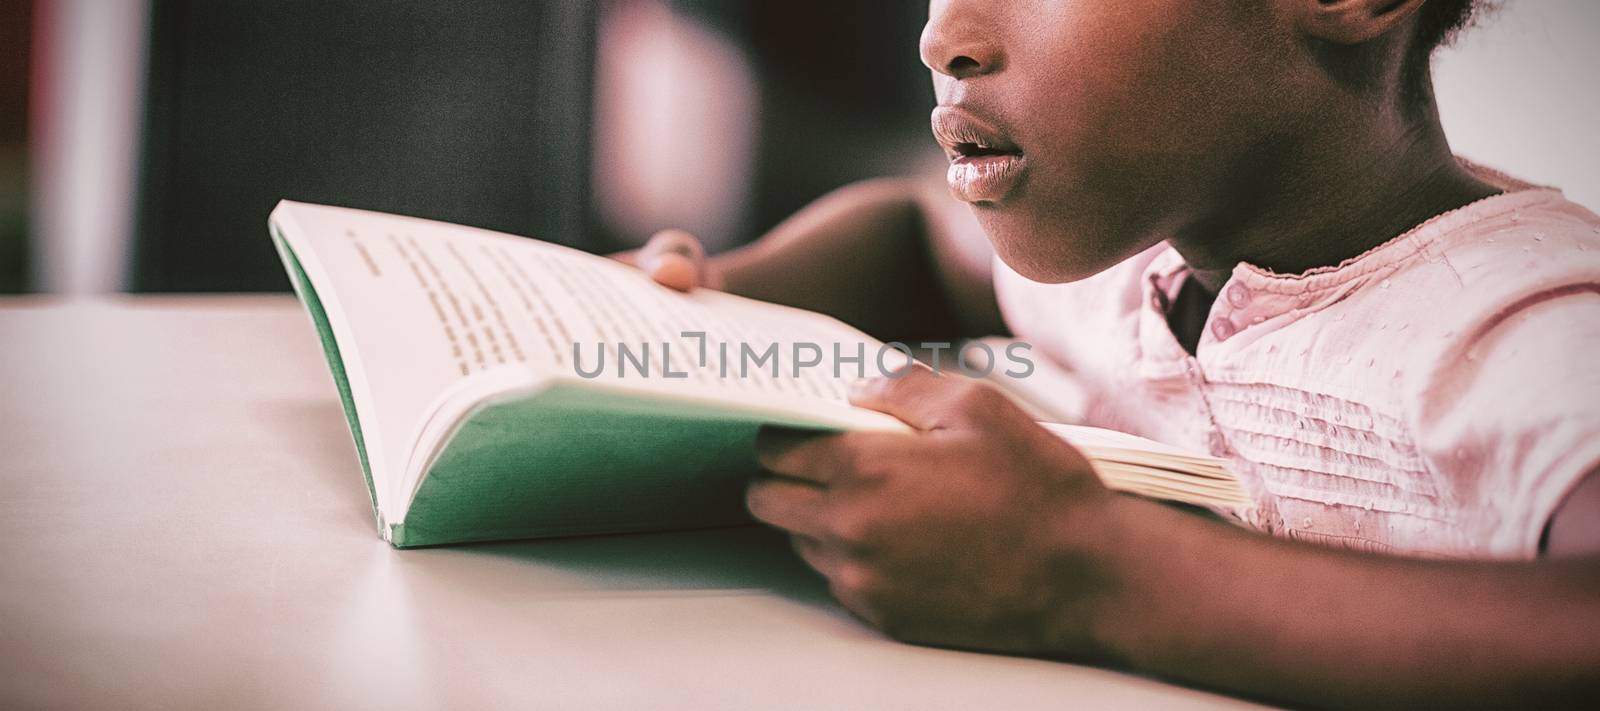 Girl reading a book in the classroom by Wavebreakmedia